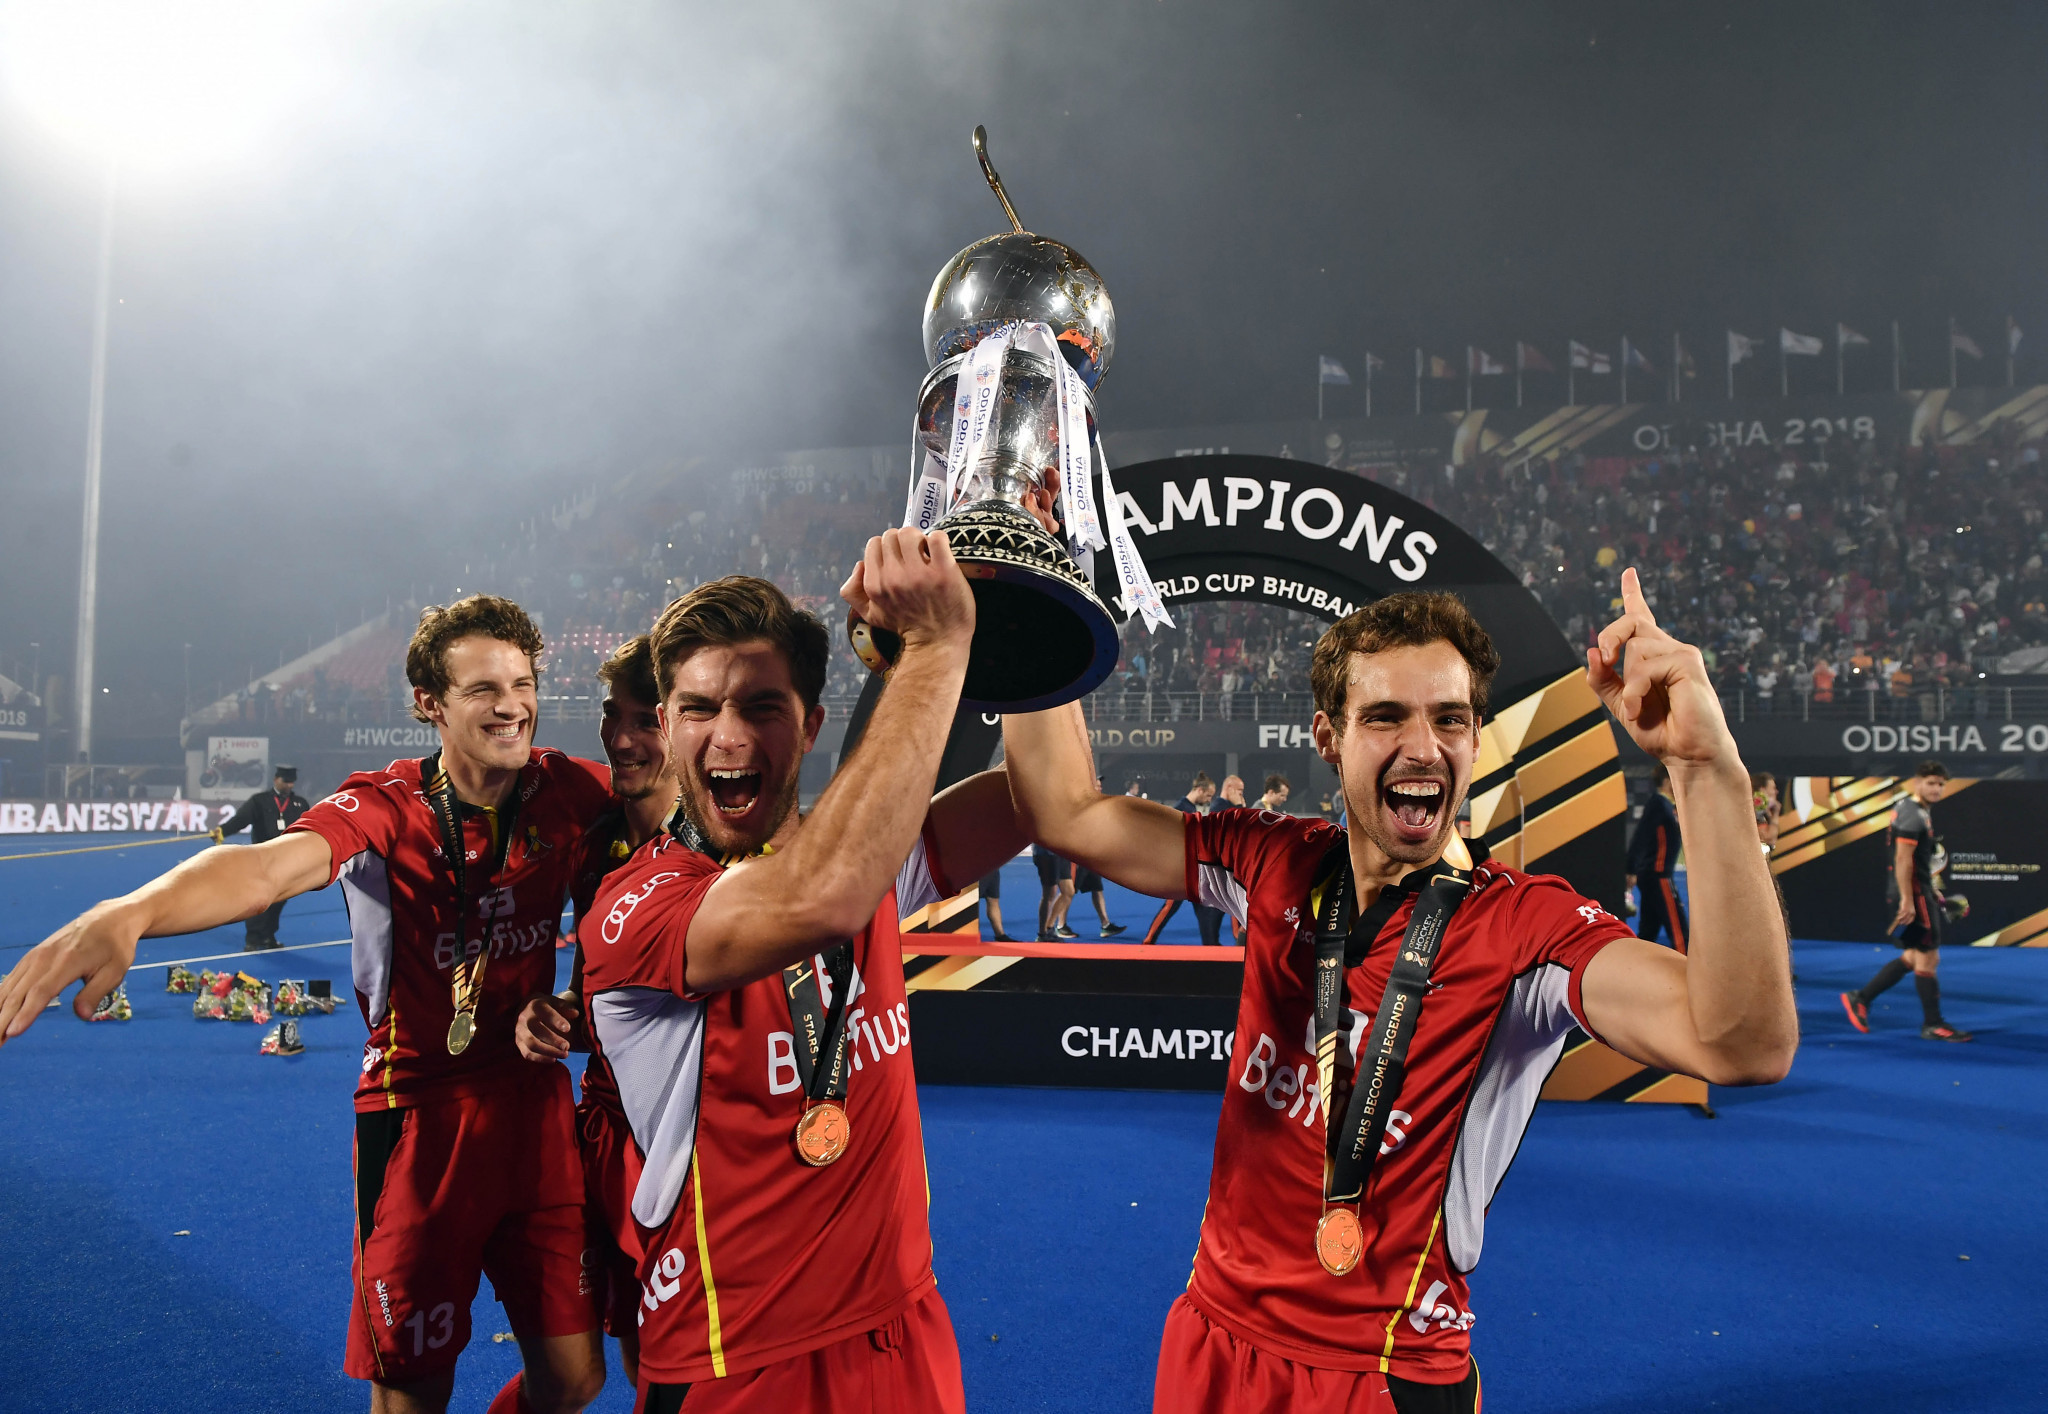 Battle-lines drawn as candidates for both Hockey World Cups emerge